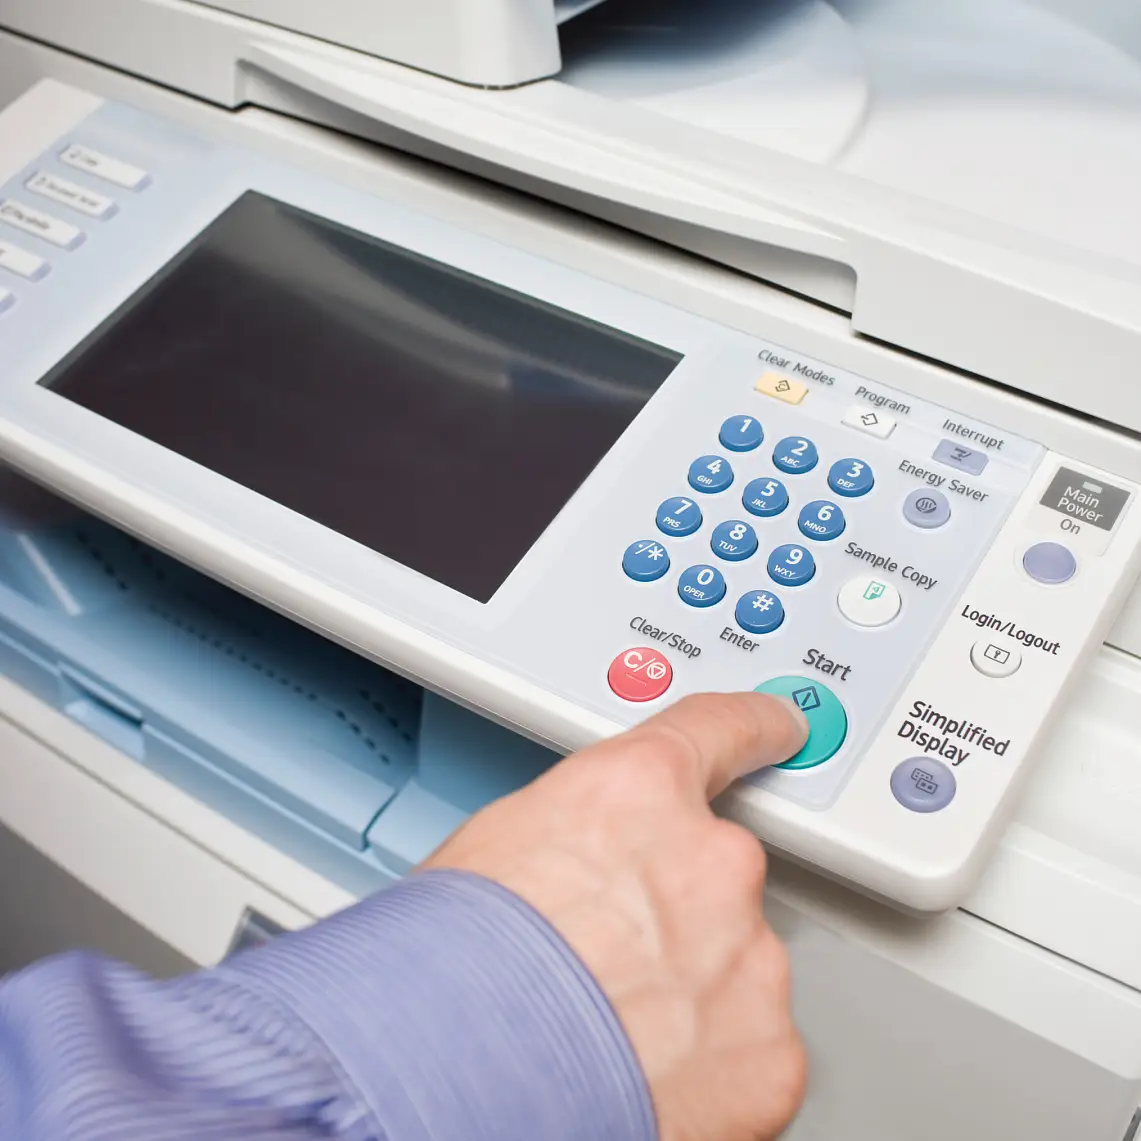 tesa offers a complete assortment of mounting and bonding applications for copiers and printers